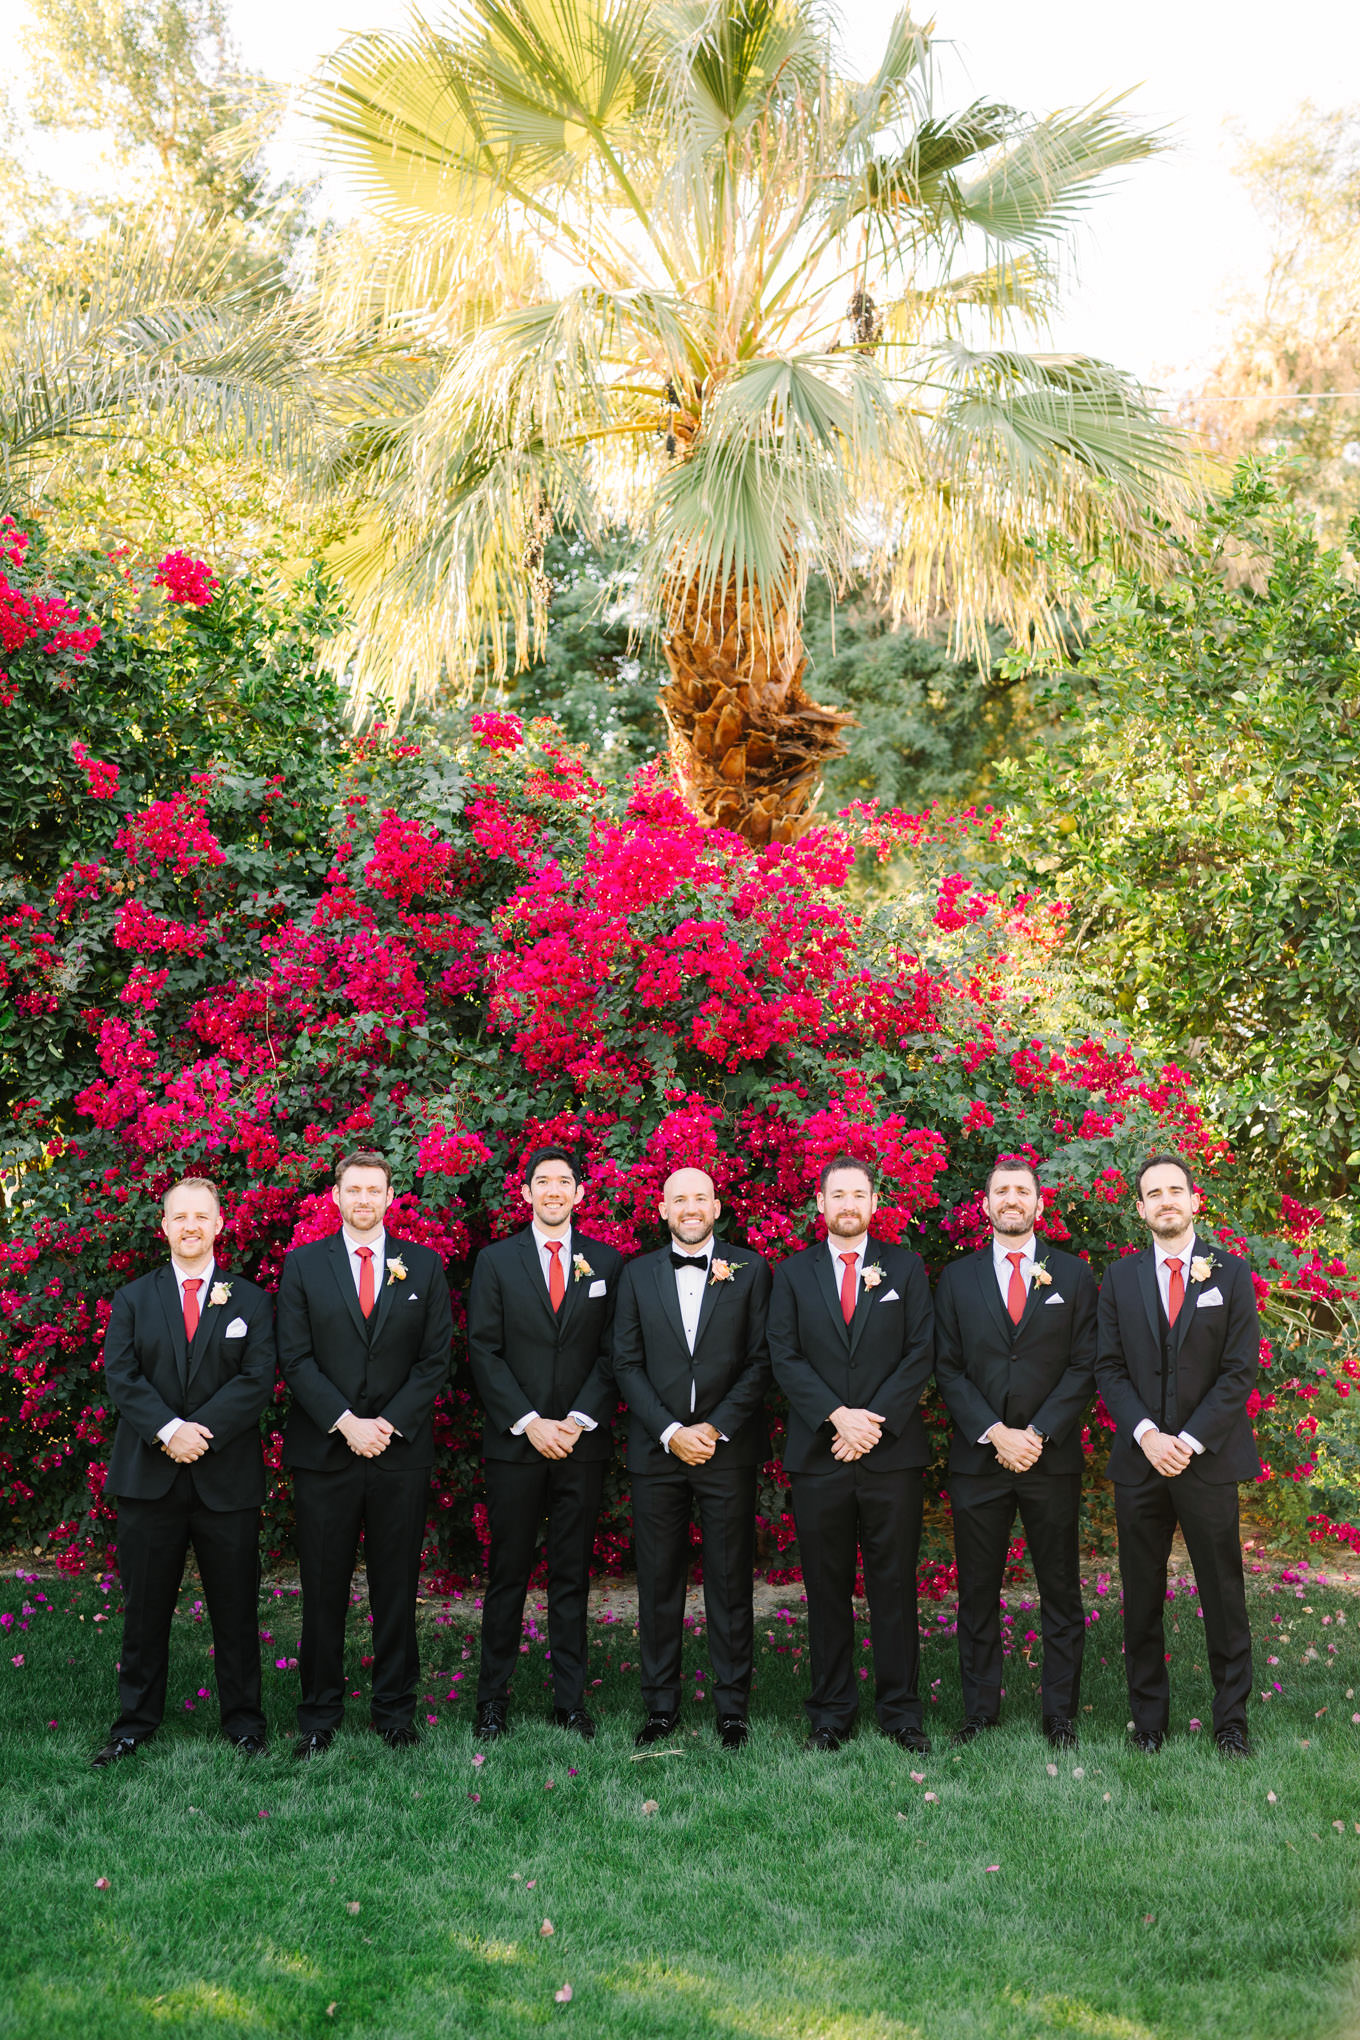 Groomsmen portraits | Pink Bougainvillea Estate wedding | Colorful LA wedding photography | #bougainvilleaestate #palmspringswedding #palmspringsweddingvenue #palmspringsphotographer Source: Mary Costa Photography | Los Angeles